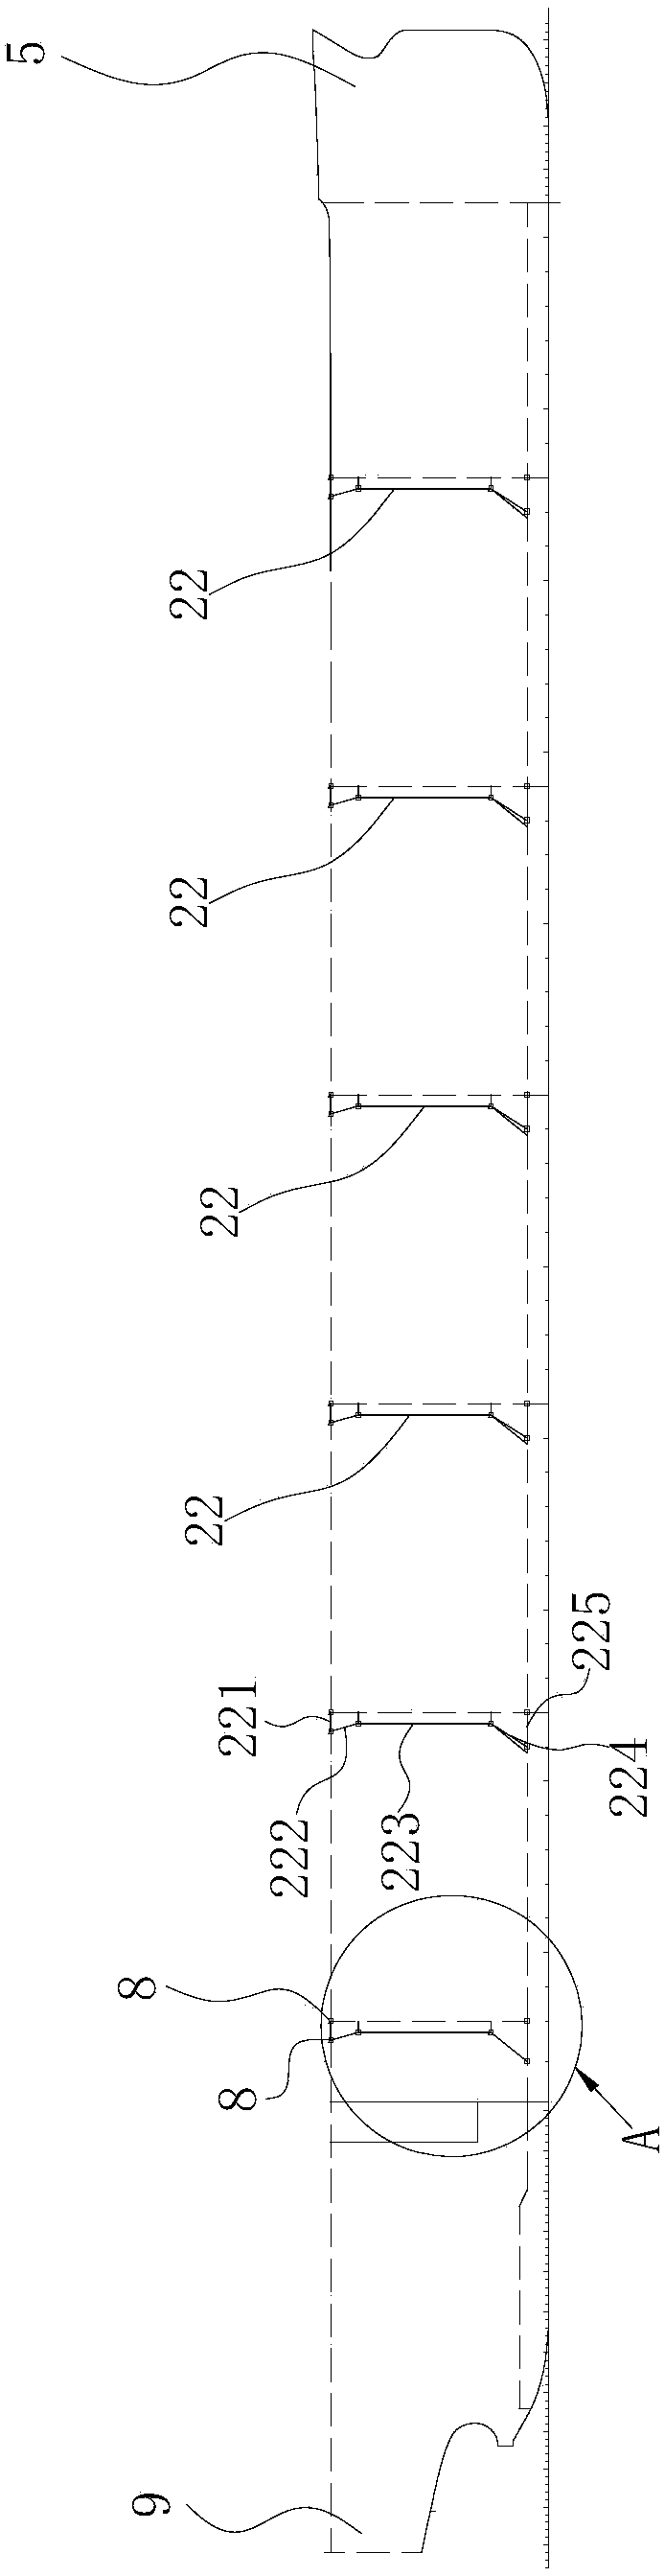 Monitoring method for structural hotspot stress of ship